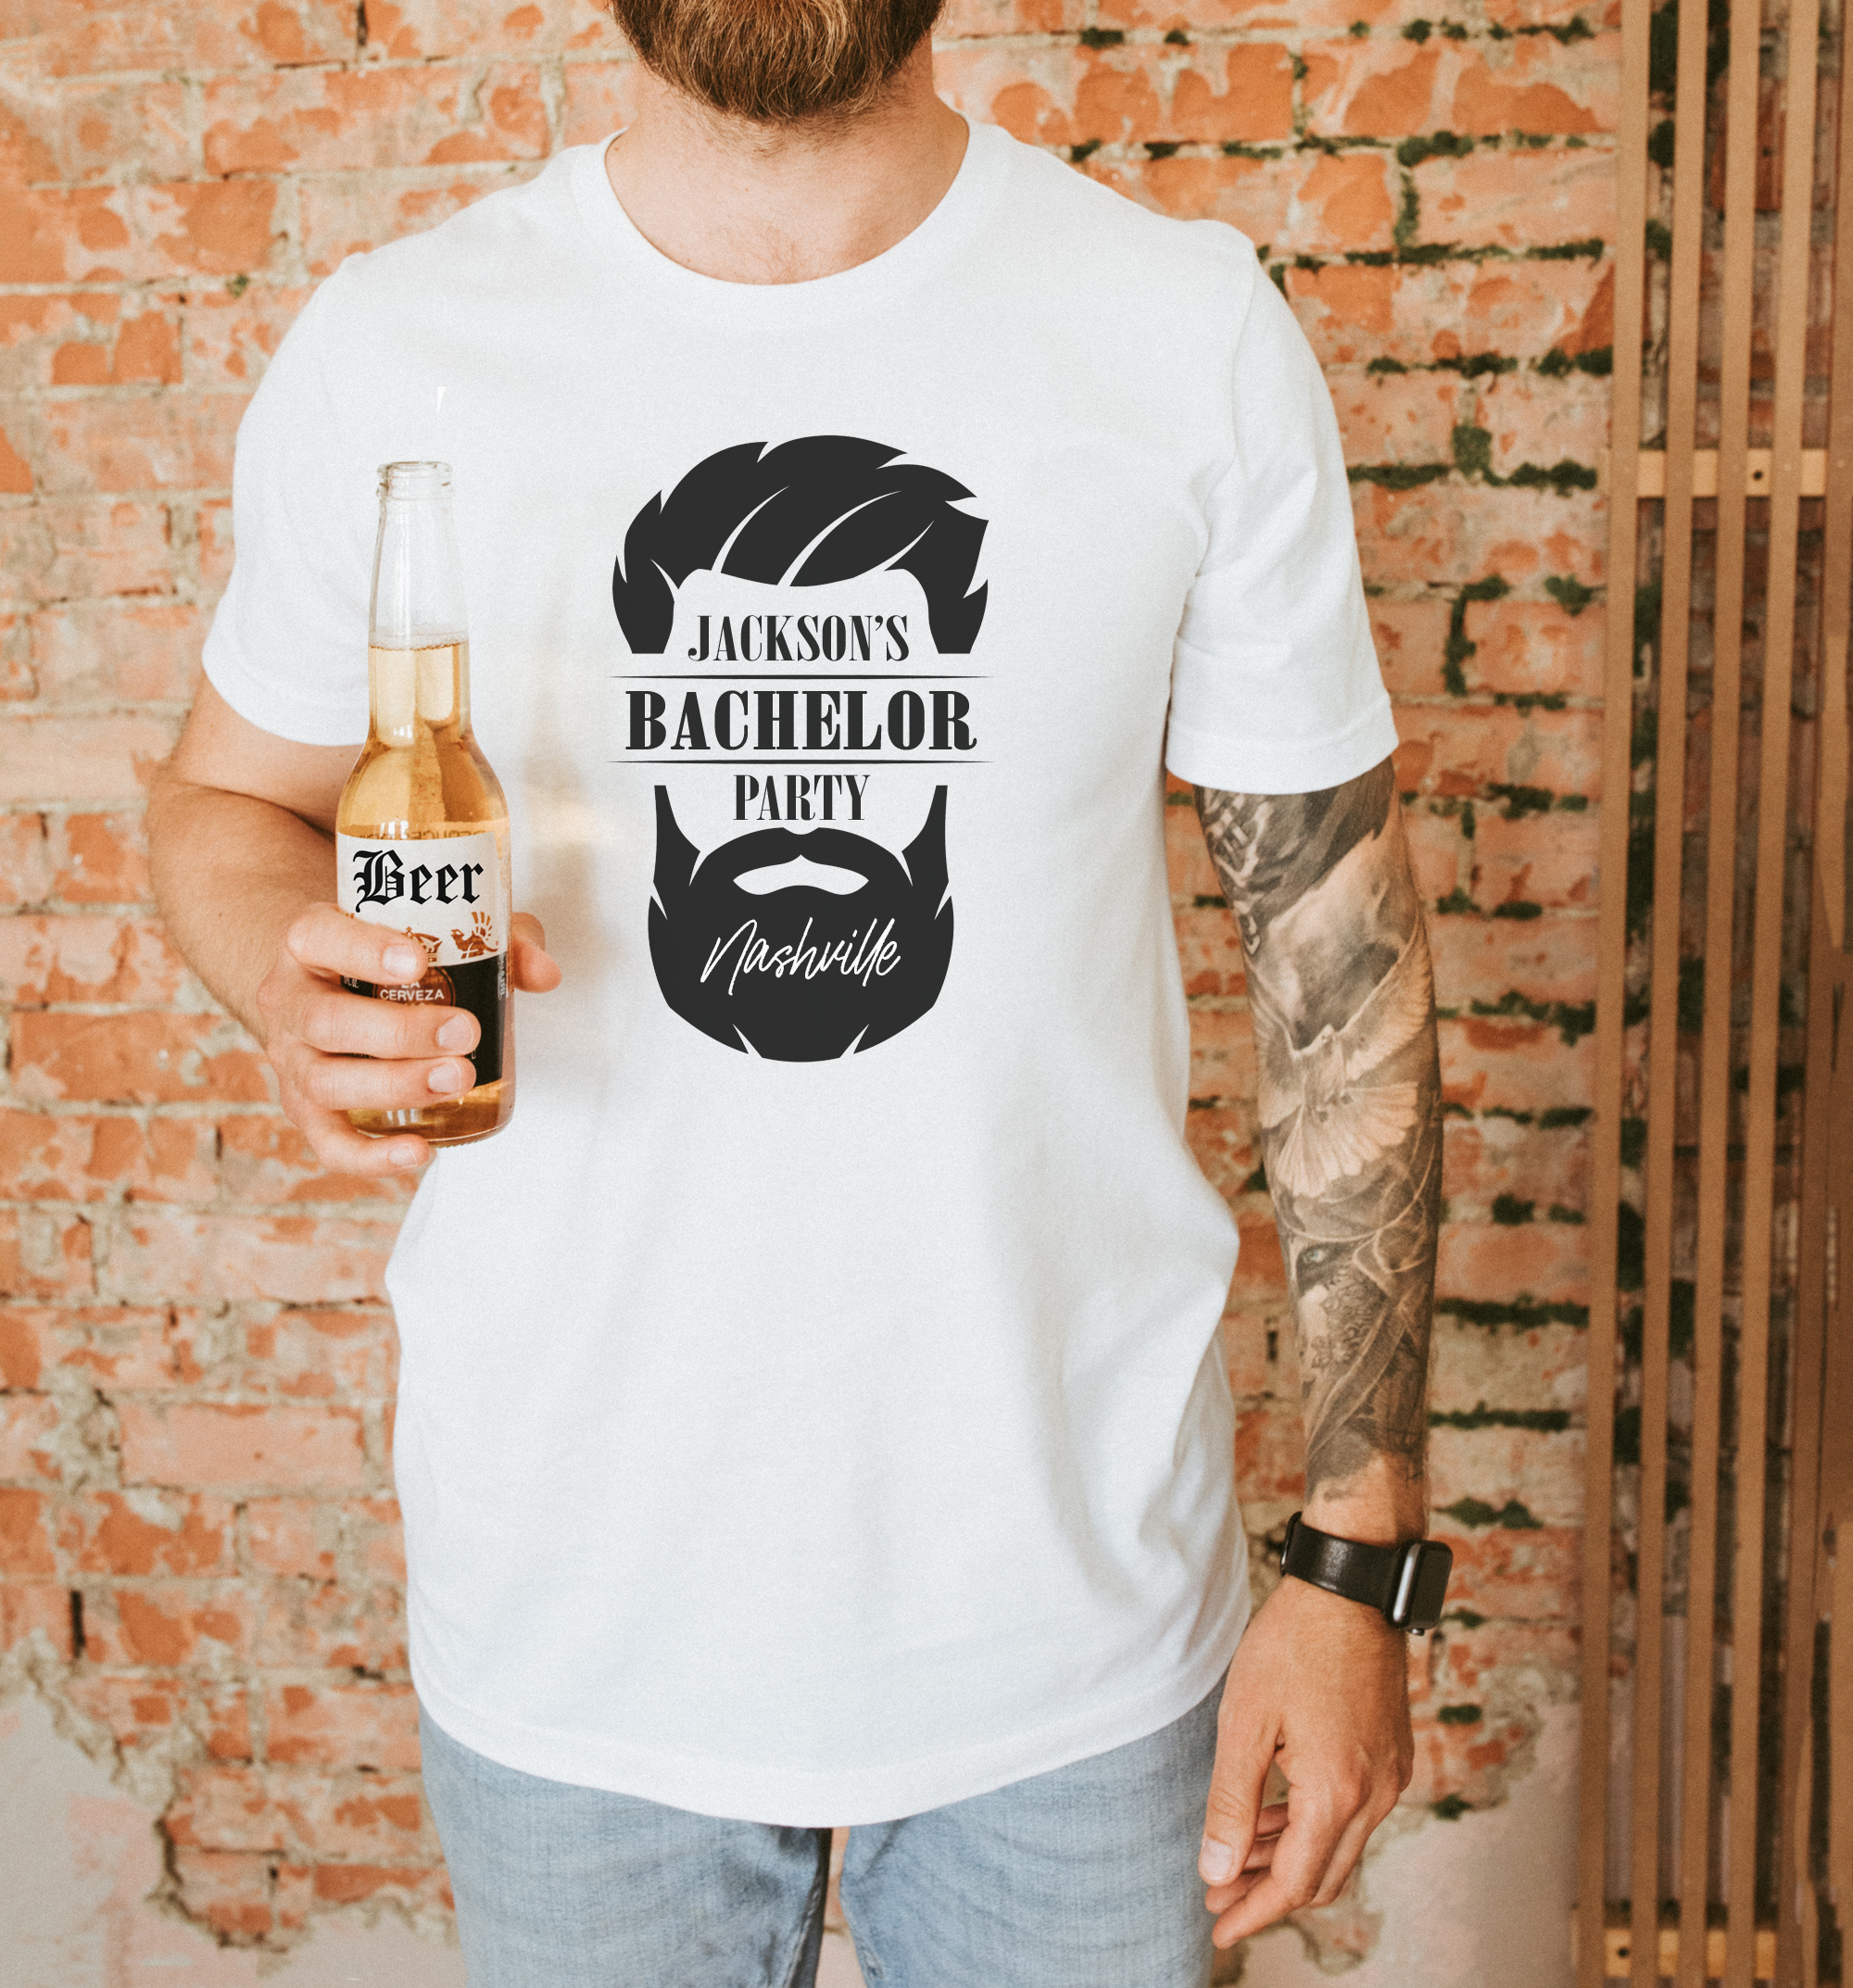 Bachelor Party Shirt | Hipster Bearded Bachelor Party Shirt Funny - ilulily designs